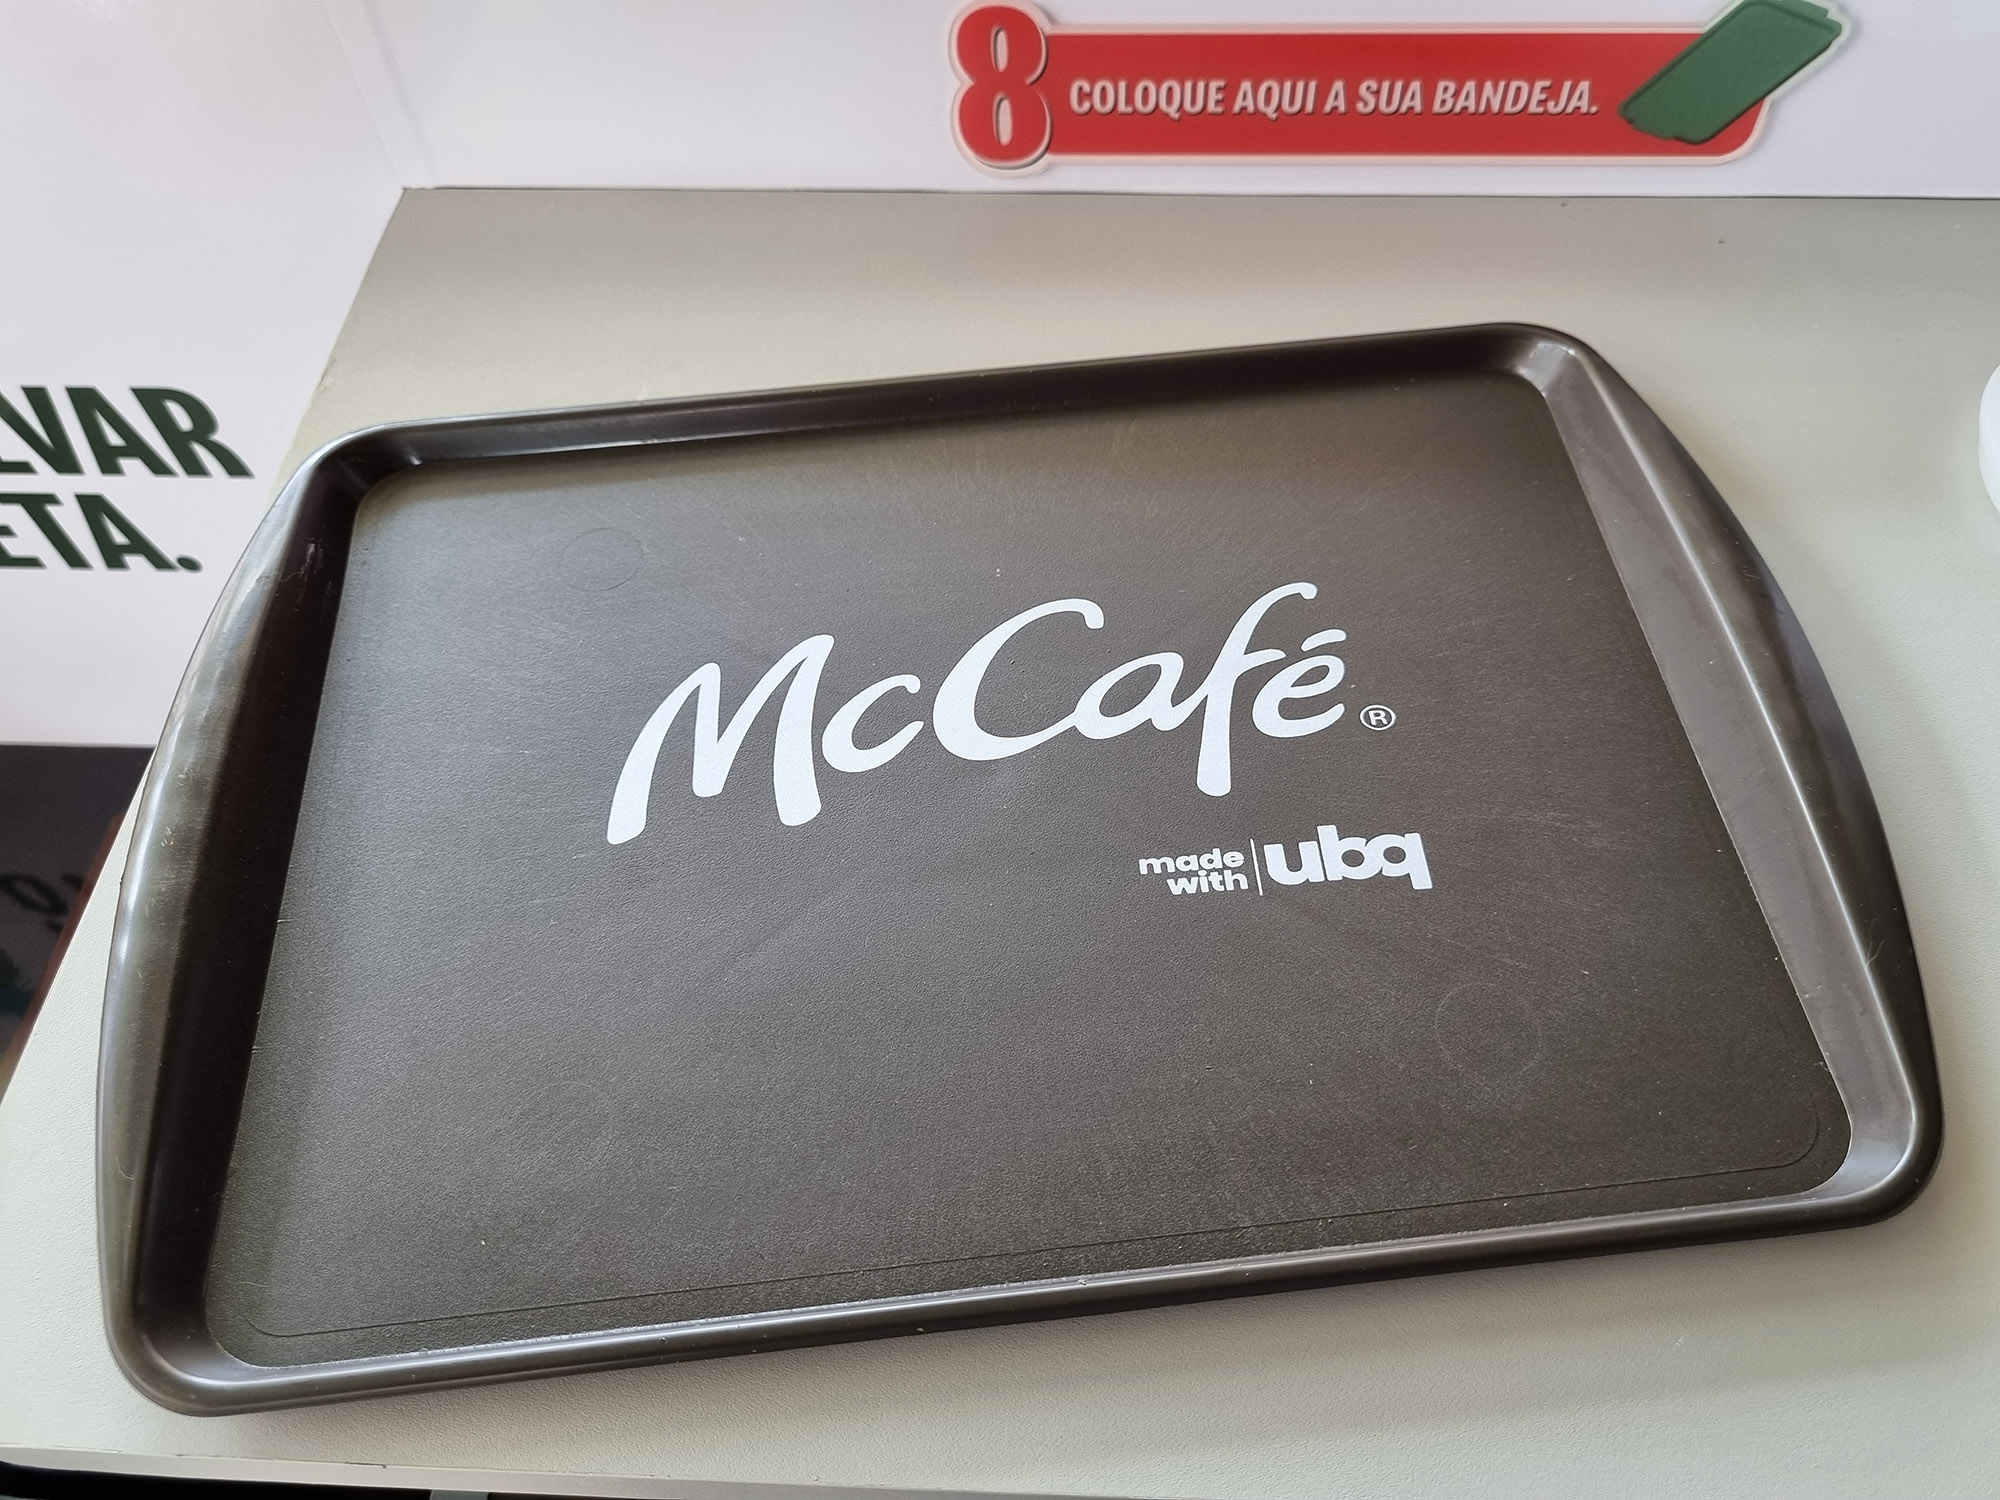 Arcos Dorados first partnered with UBQ to develop these McTray food serving trays, which they introduced in 2021. 